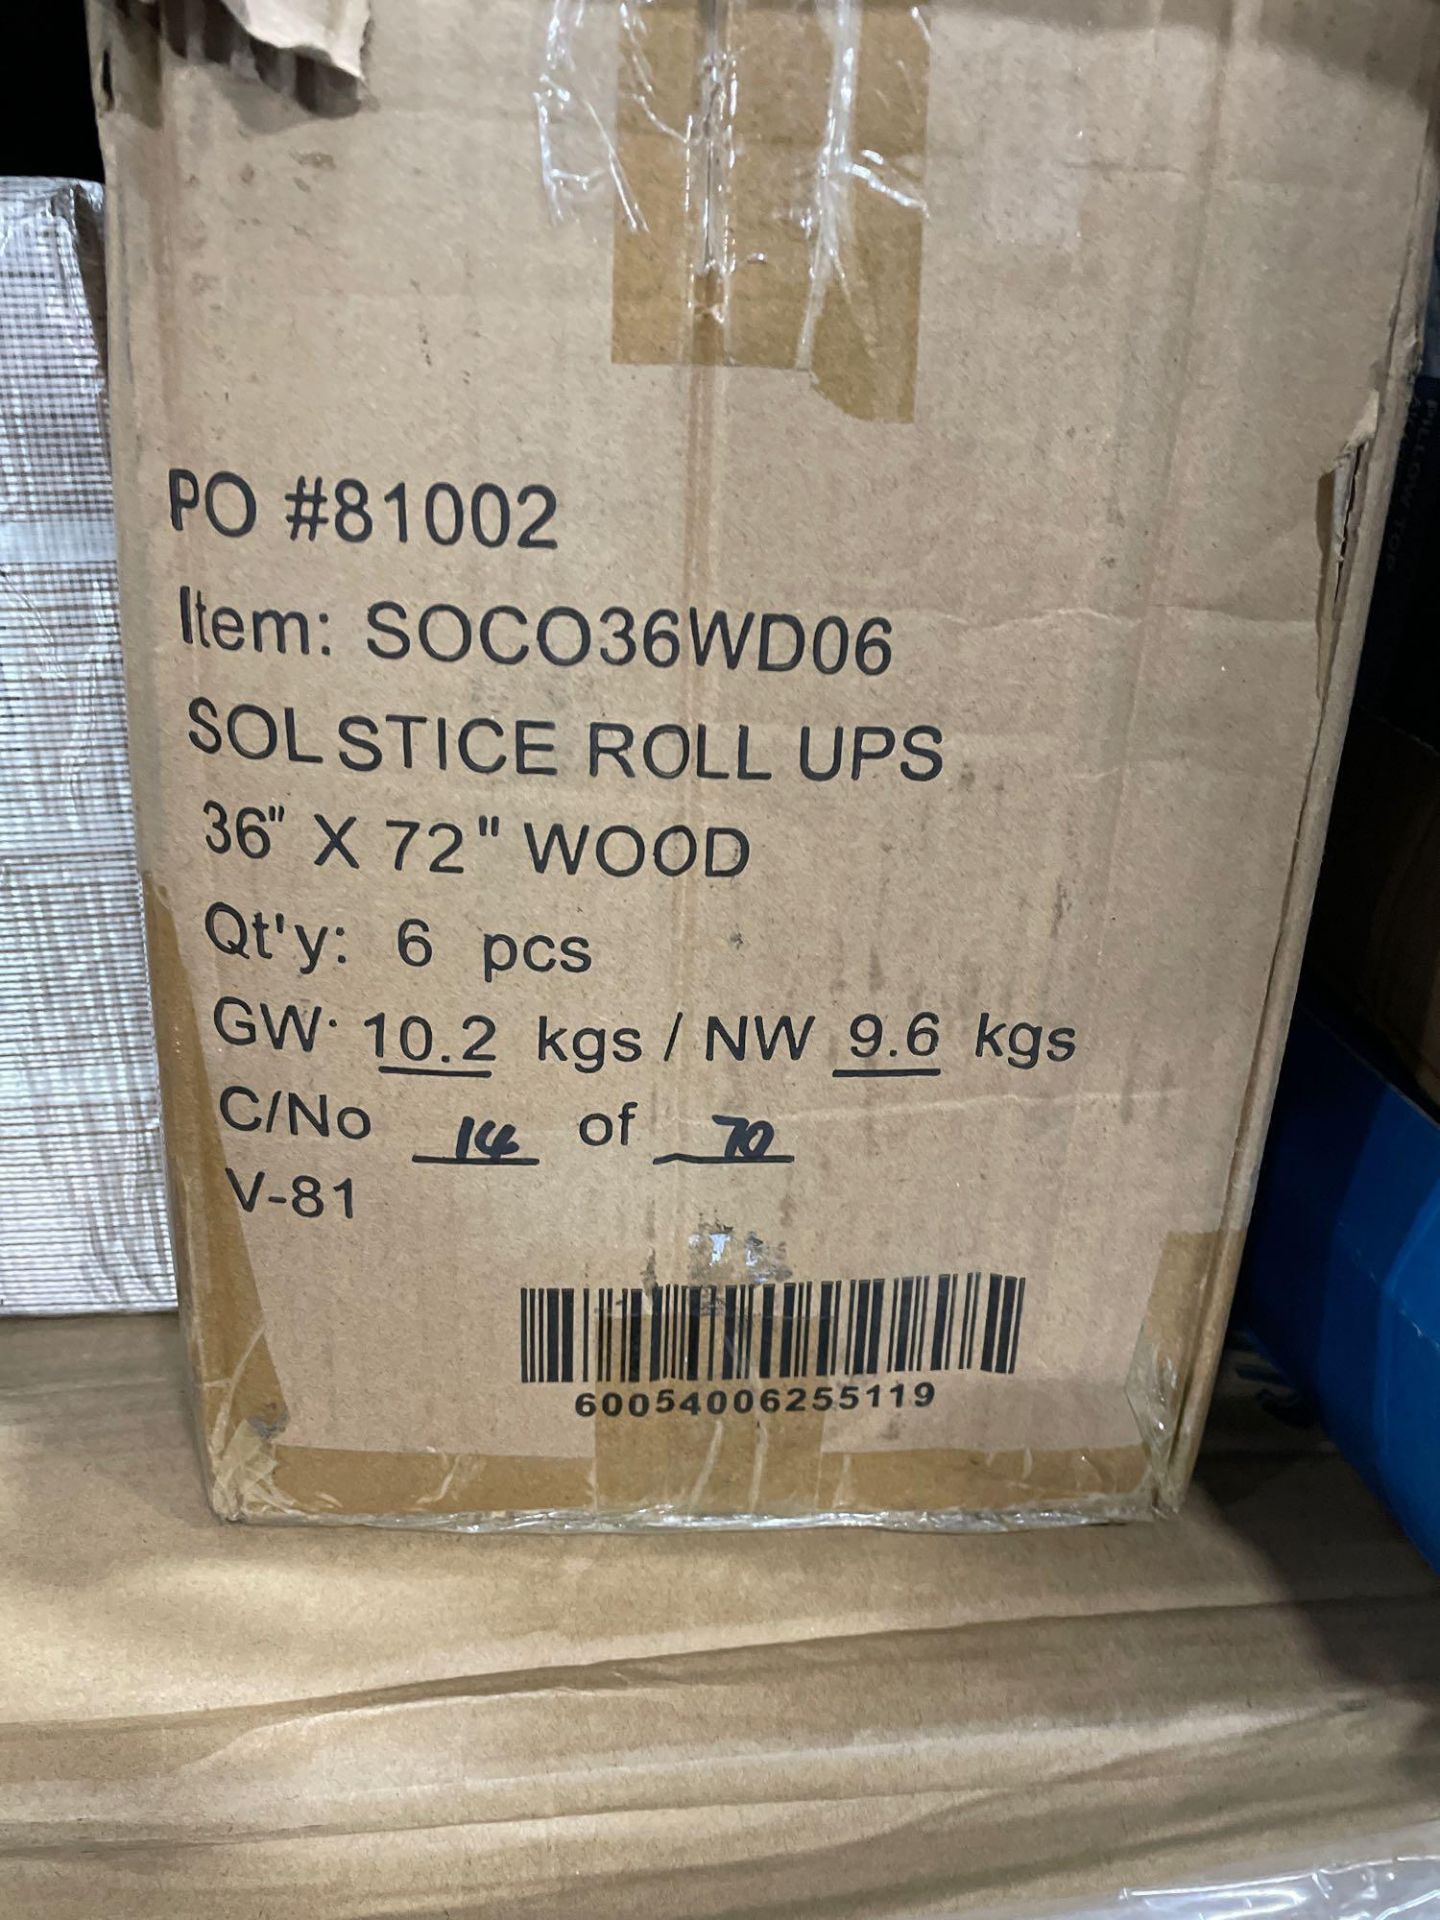 two pallets - Image 11 of 17